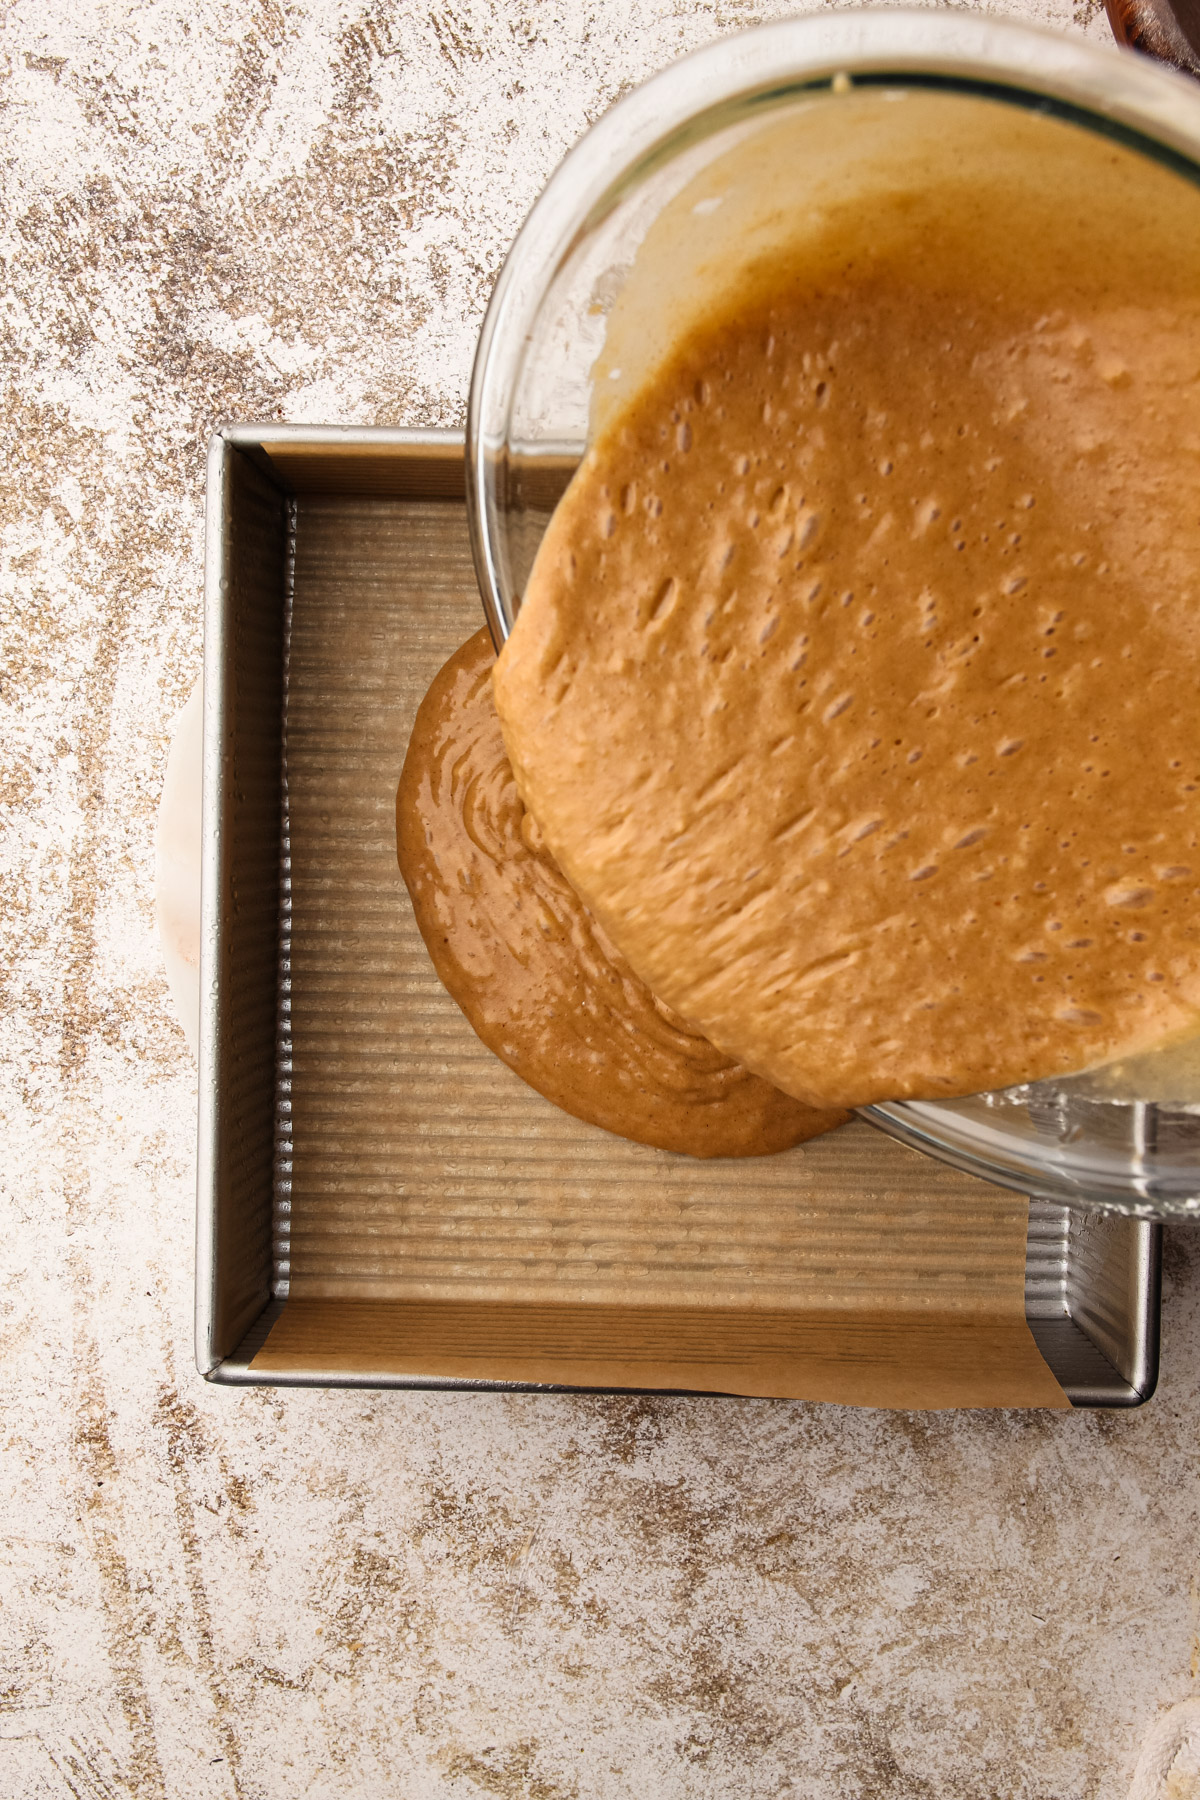 A brown, bubbly cake batter being poured from a glass bowl into a parchment-lined 8-inch square baking pan